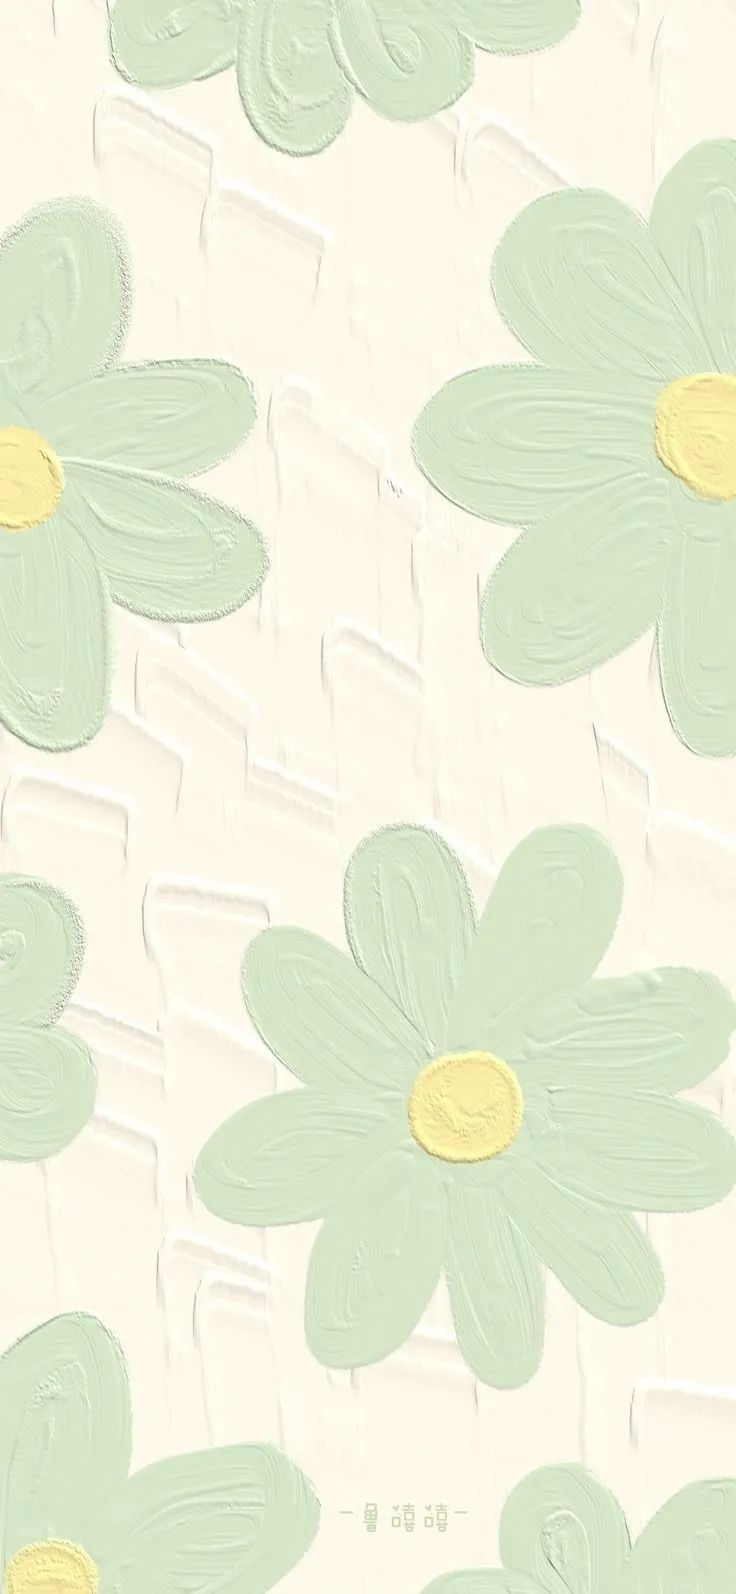 Really Cute Preppy Aesthetic Wallpaper For Your Phone!. Mint green wallpaper iphone, iPhone wallpaper green, Mint green wallpaper